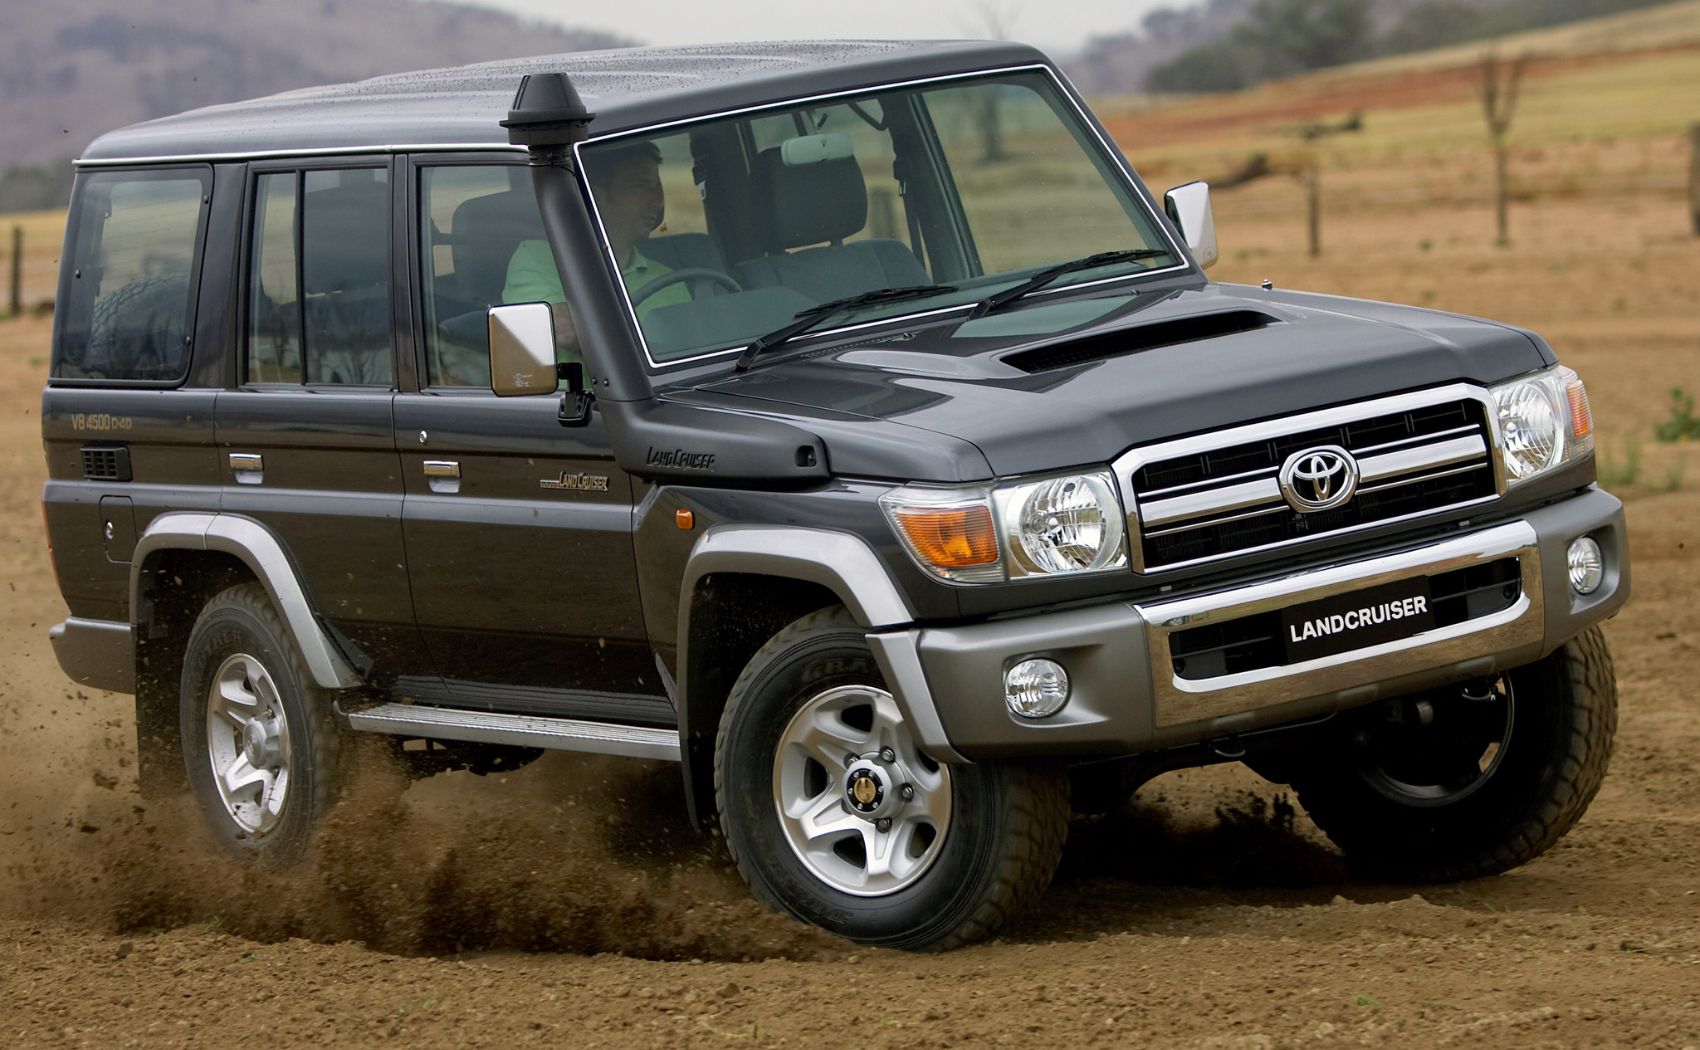 a-look-at-the-iconic-70-series-land-cruiser-the-most-reliable-toyota-ever-built_14.jpg